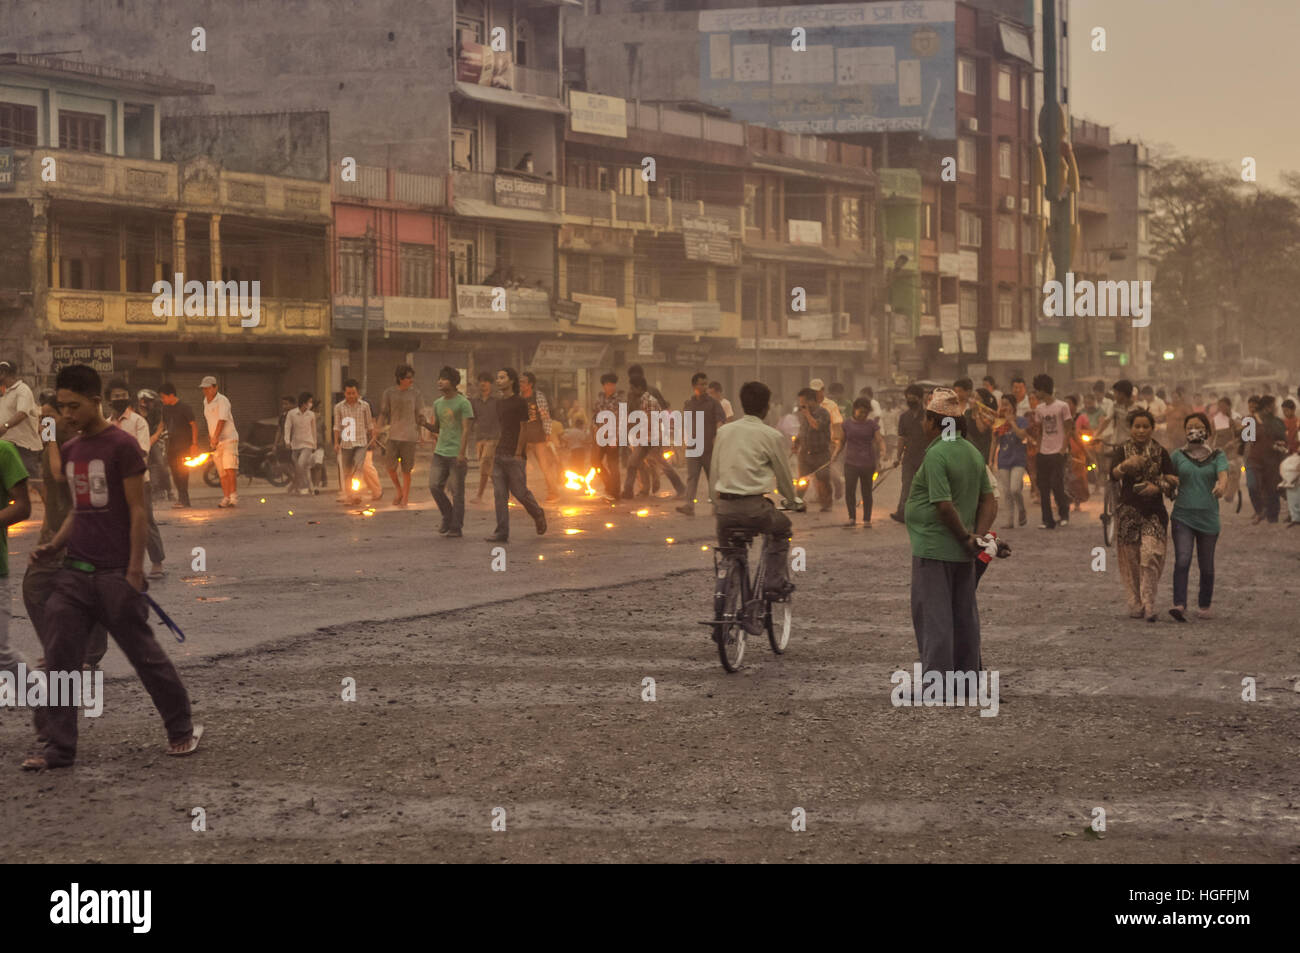 Nepal - circa May 2012: Native people walk or ride bicycles on street and hold burning torches in hands on rainy day during Nepal general strike. Docu Stock Photo